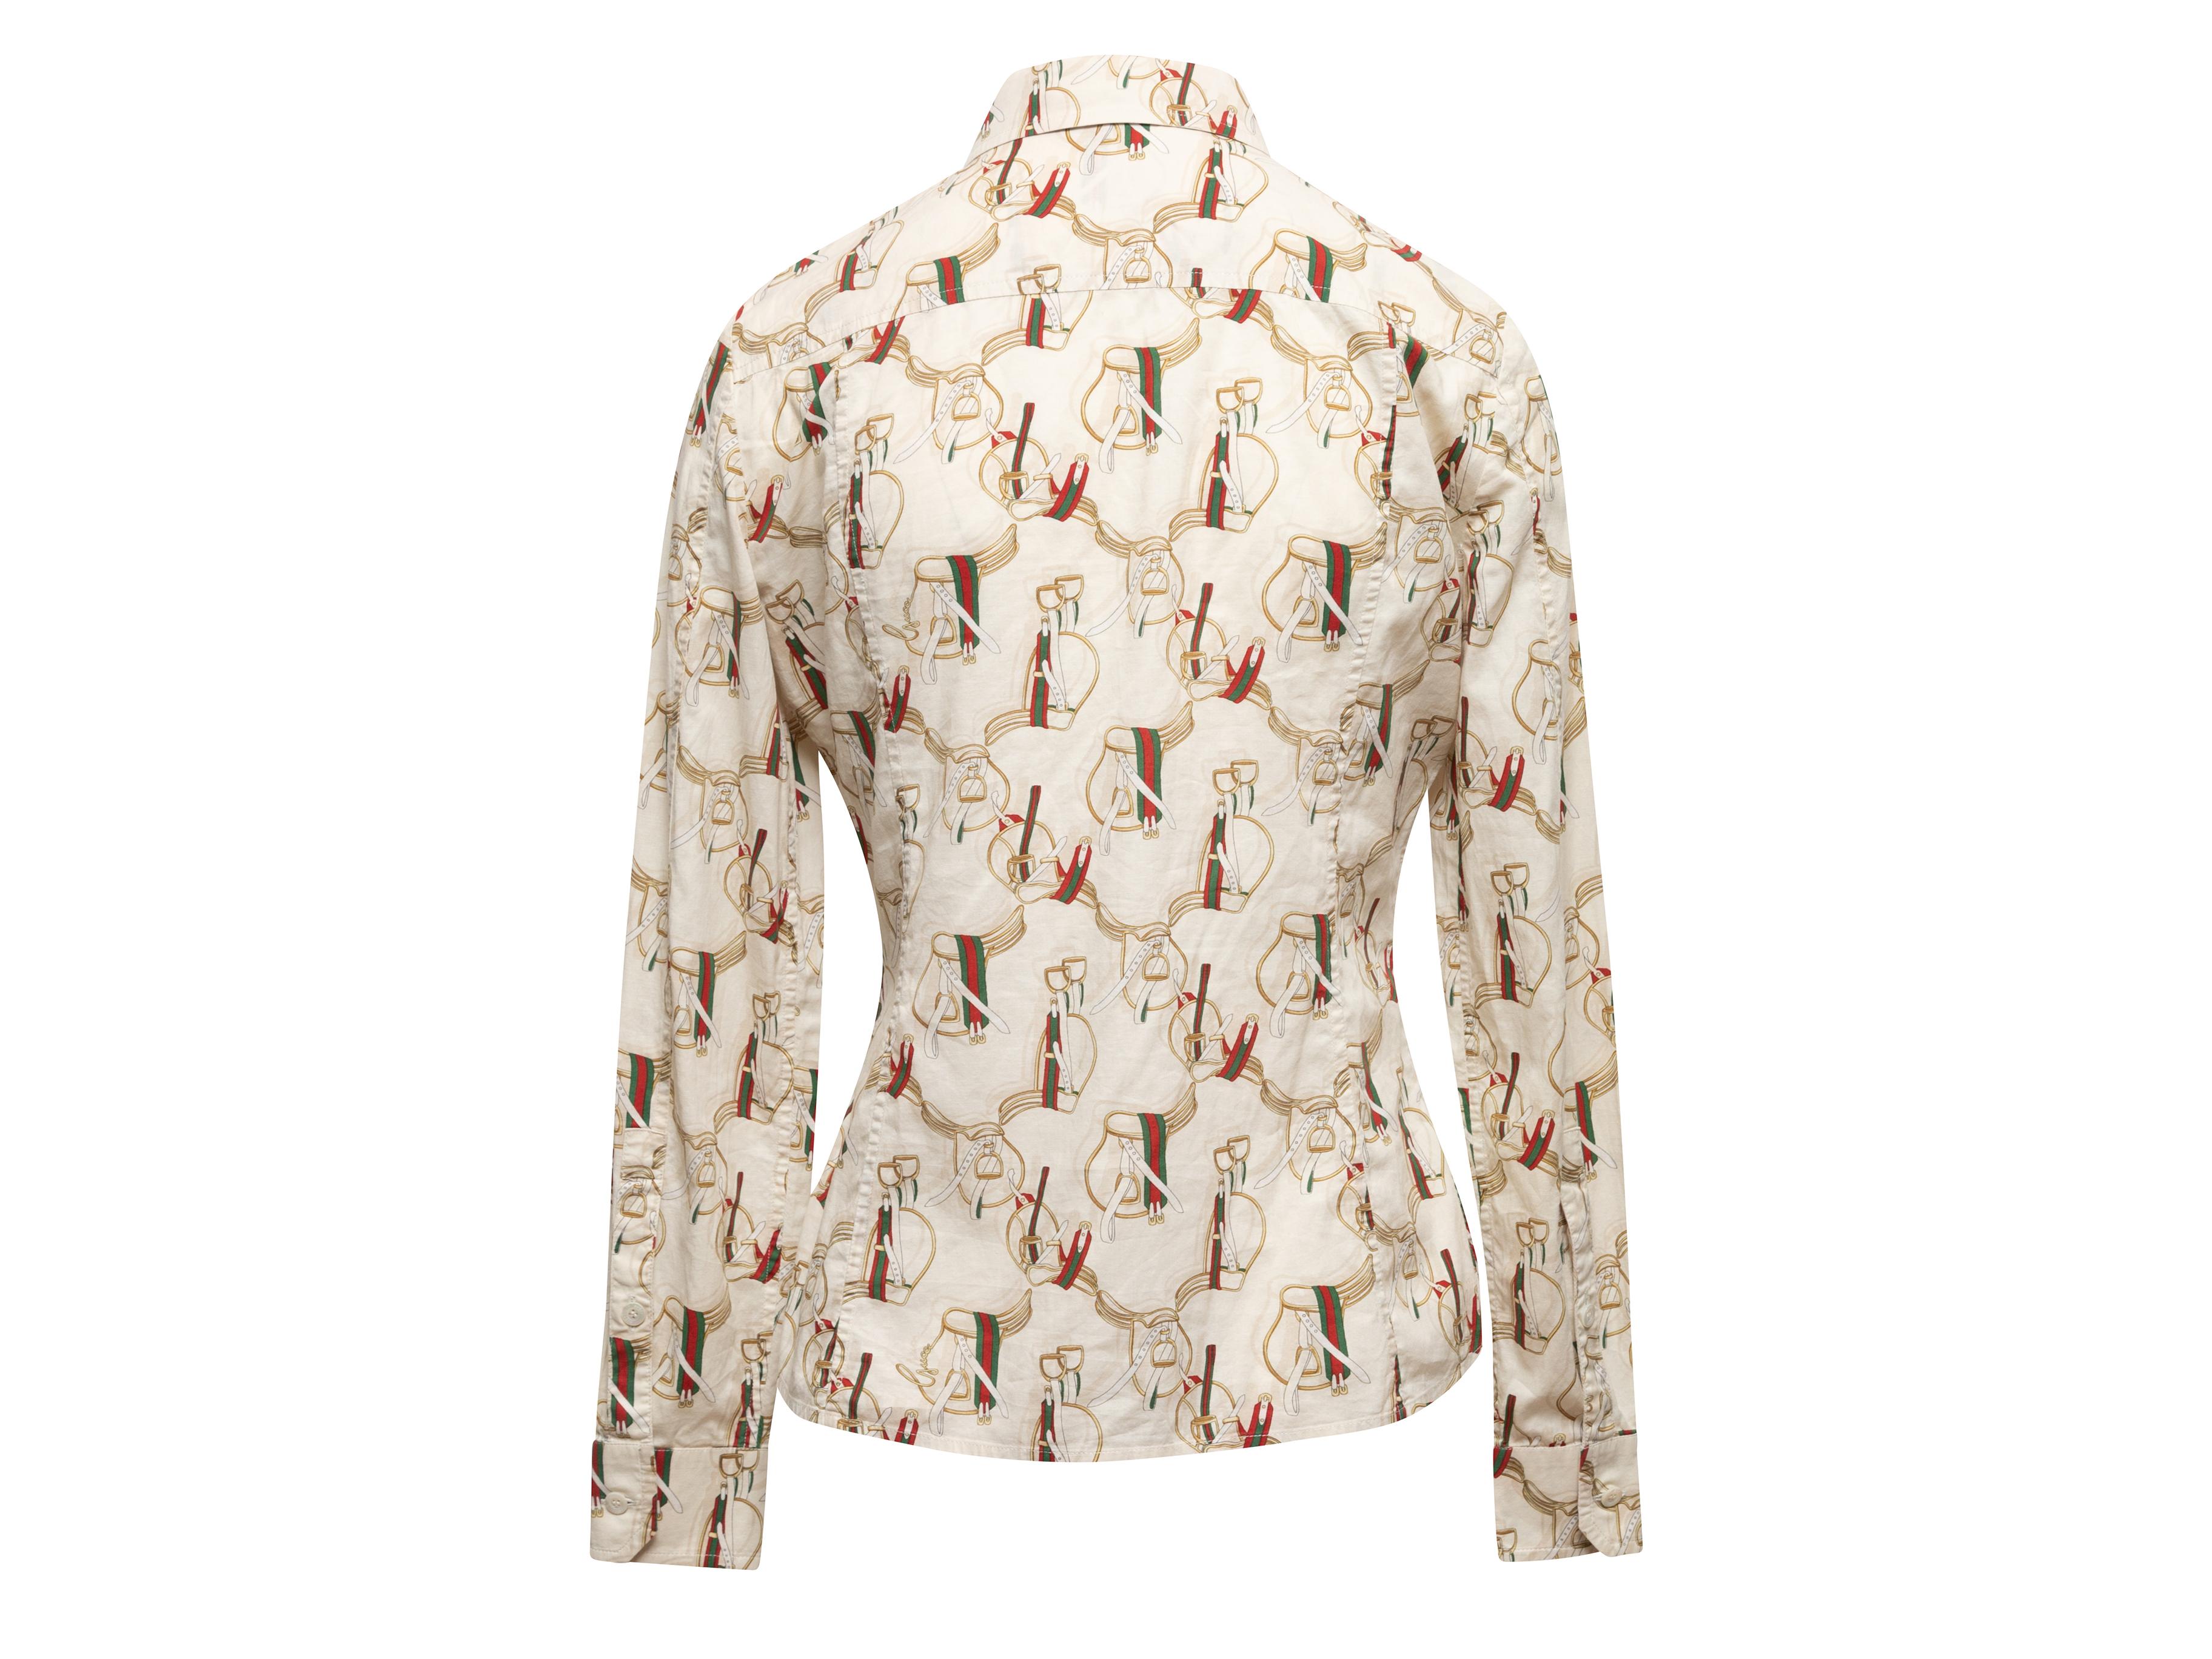 White & Multicolor Gucci Saddle Print Button-Up Top Size IT 42 In Good Condition For Sale In New York, NY